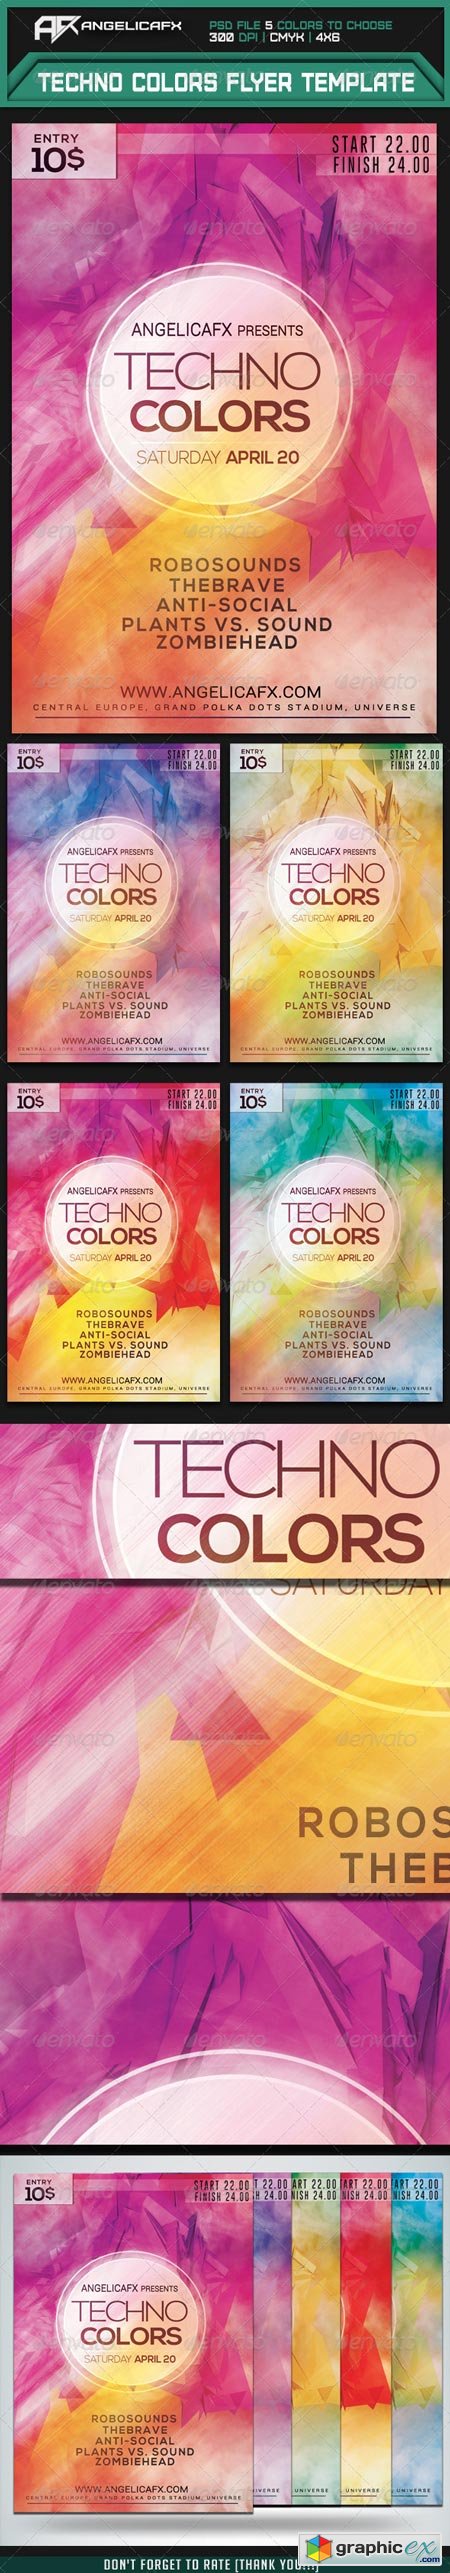 Techno Colors Flyer Template 7415558